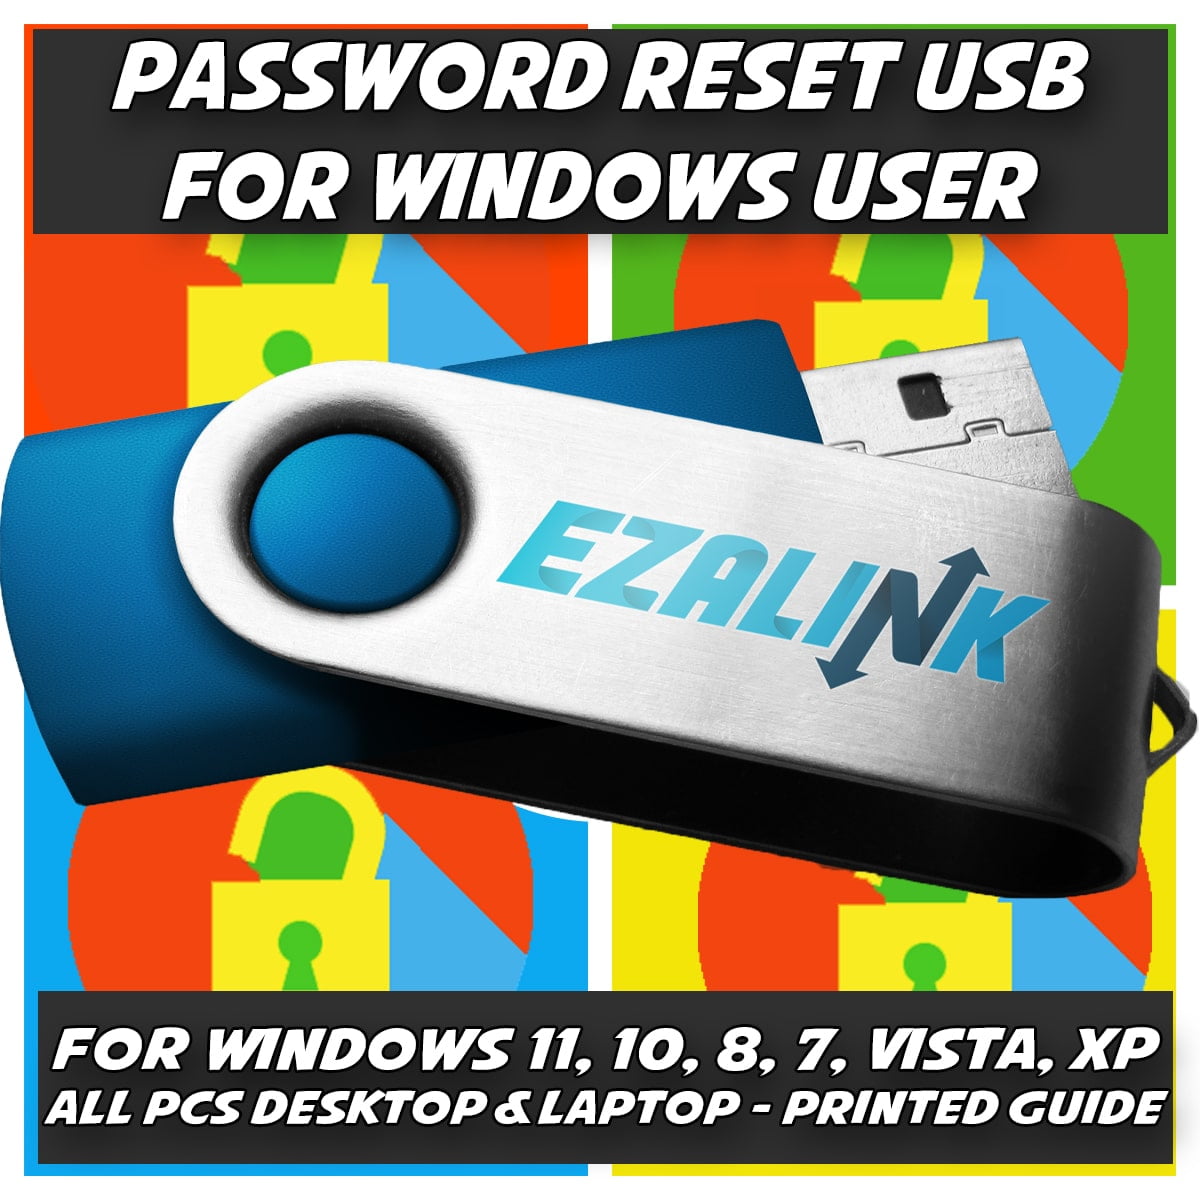 Password Reset Recovery USB for 10, 8.1, 7, Vista, XP | #1 Best Unlocker Software Tool {For Any PC Computer} -